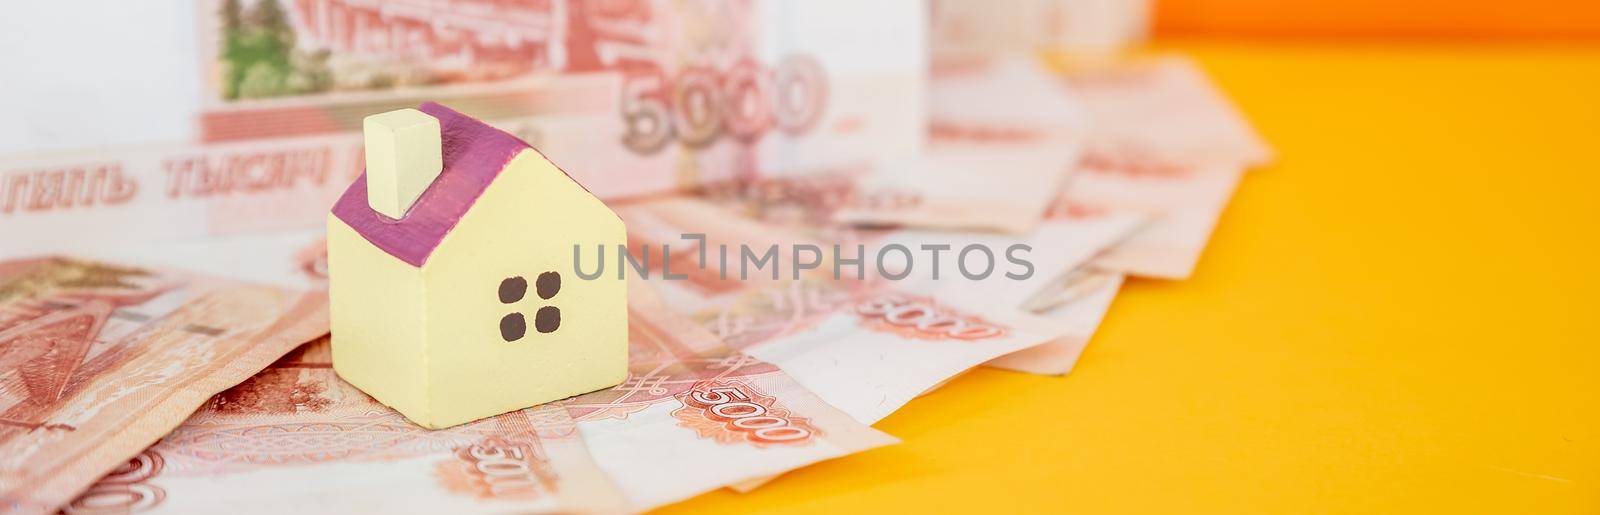 toy house on banknotes, buying your own home, mortgage, symbol of material well being